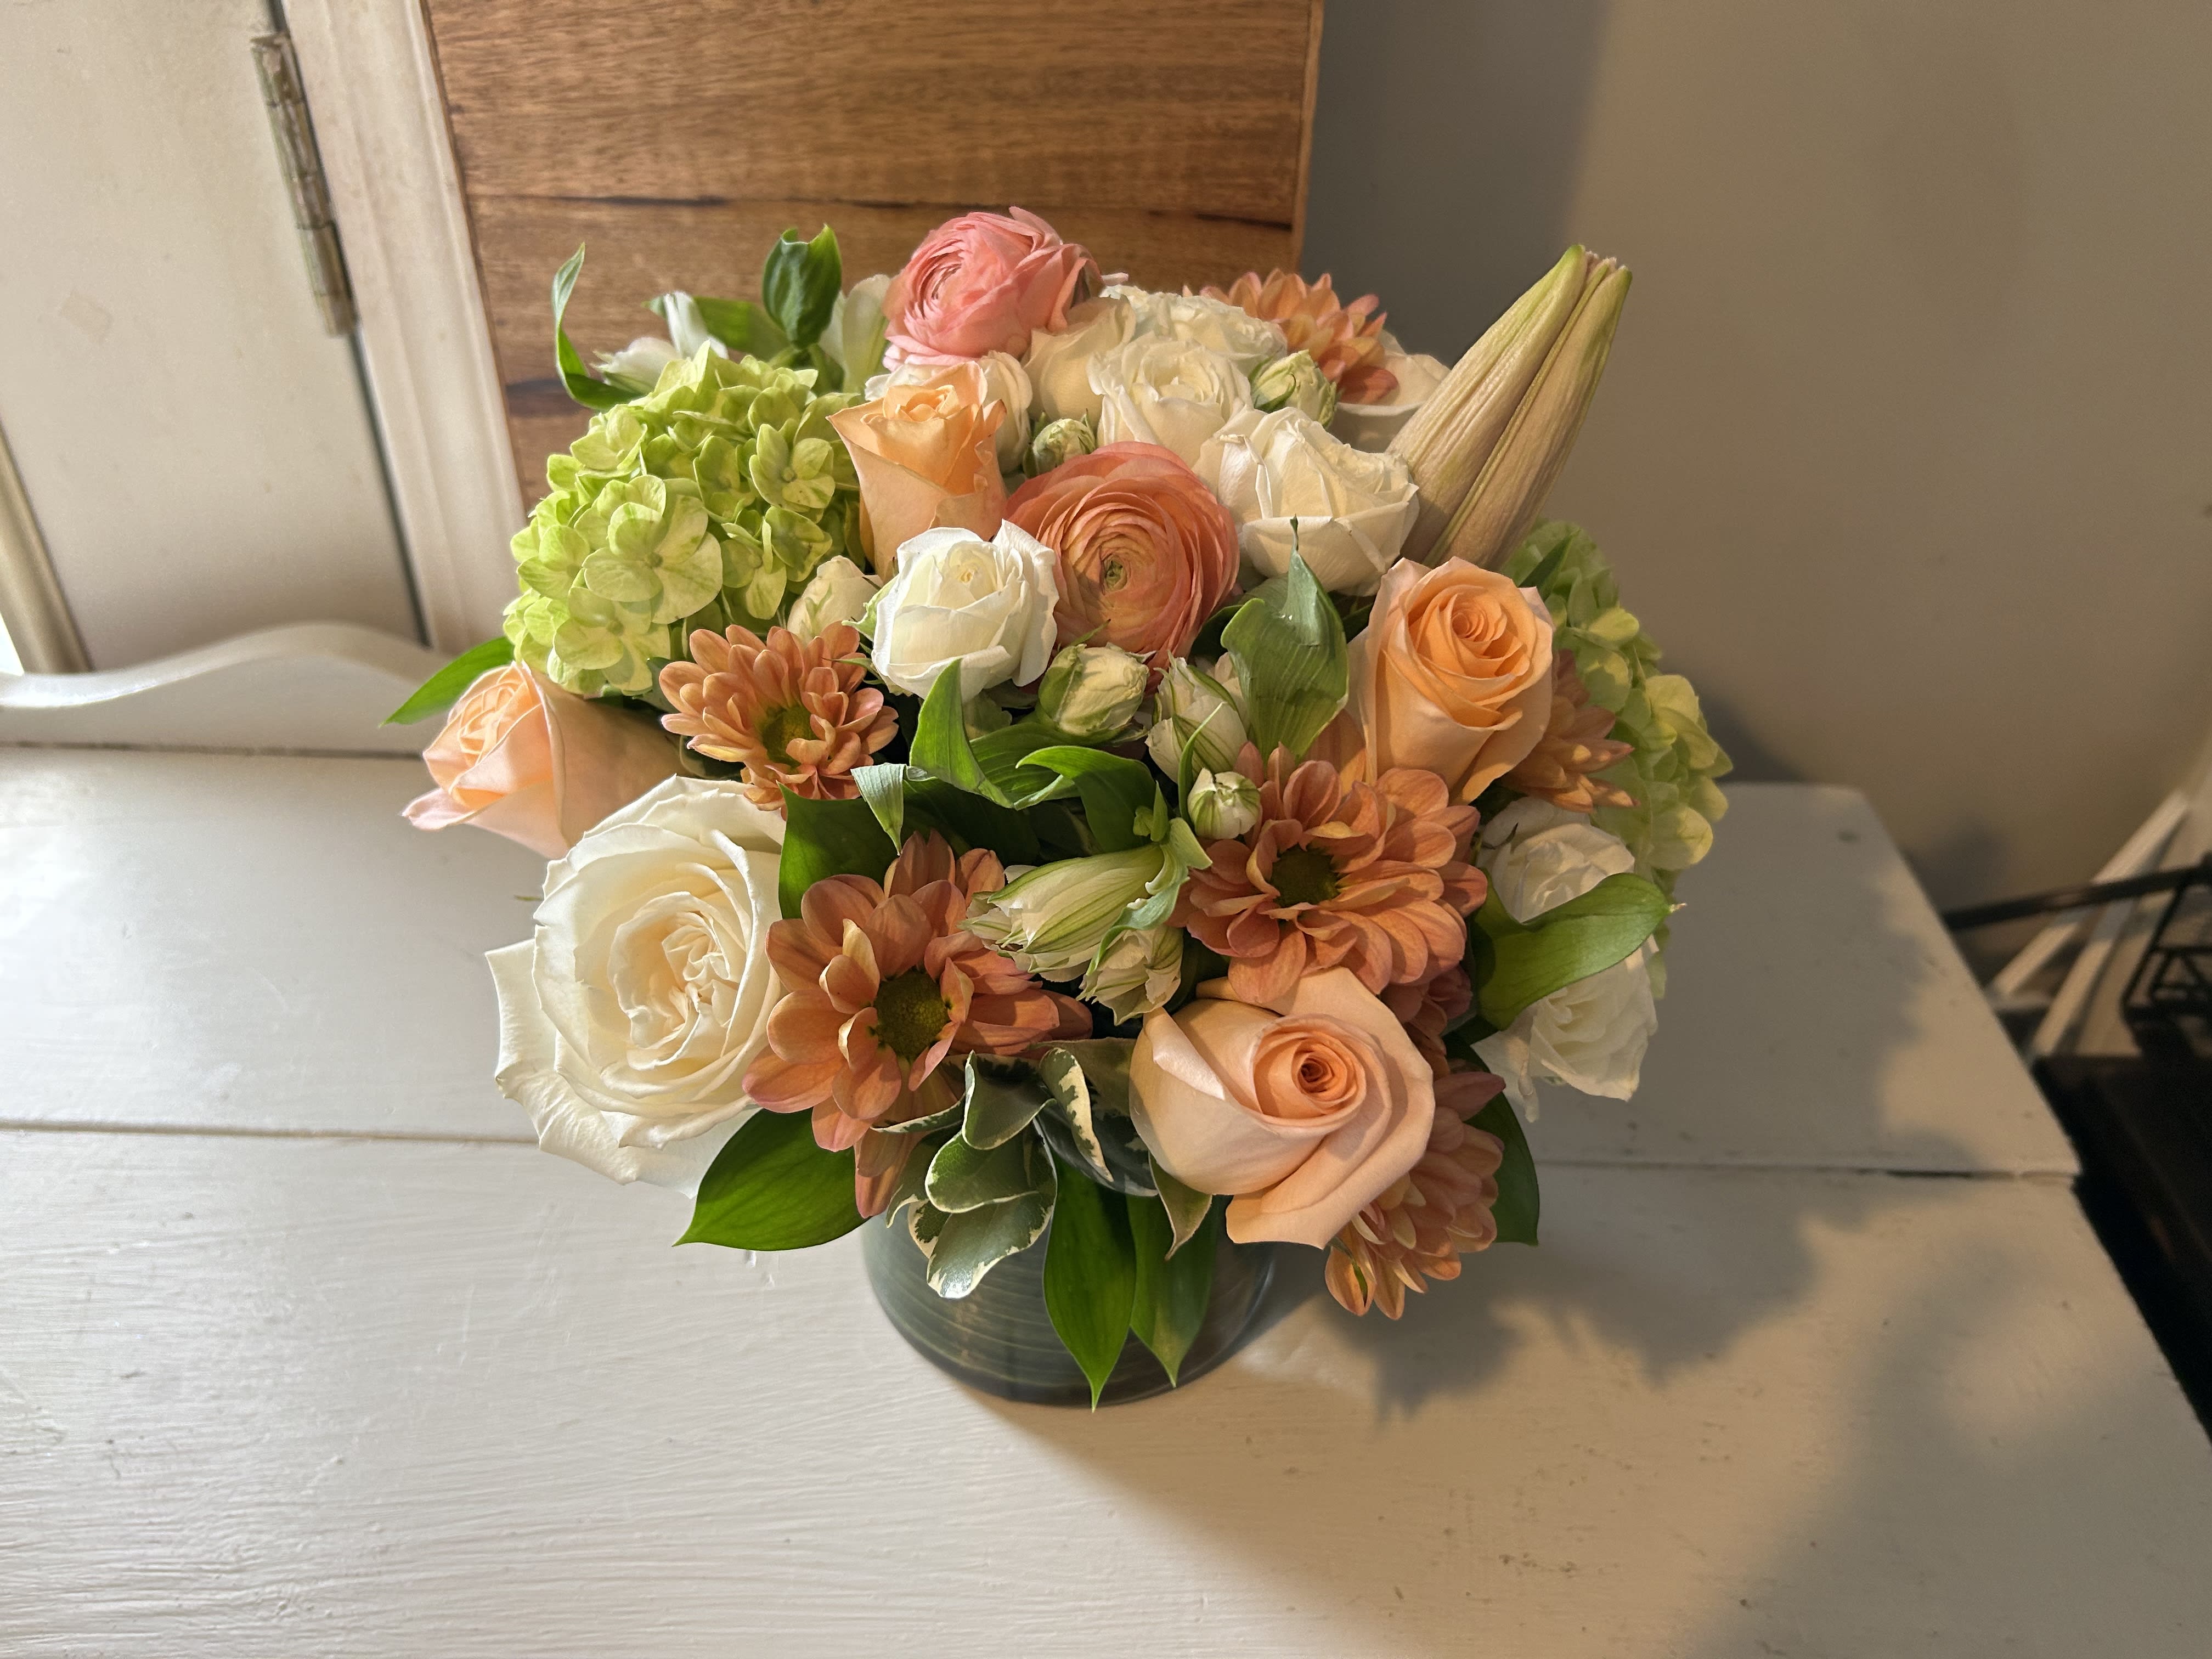 A peach for my peach! - A lovely assortment of peach and cream roses, ranunculus, spray roses and more.A new addition for the summer of 2023! 